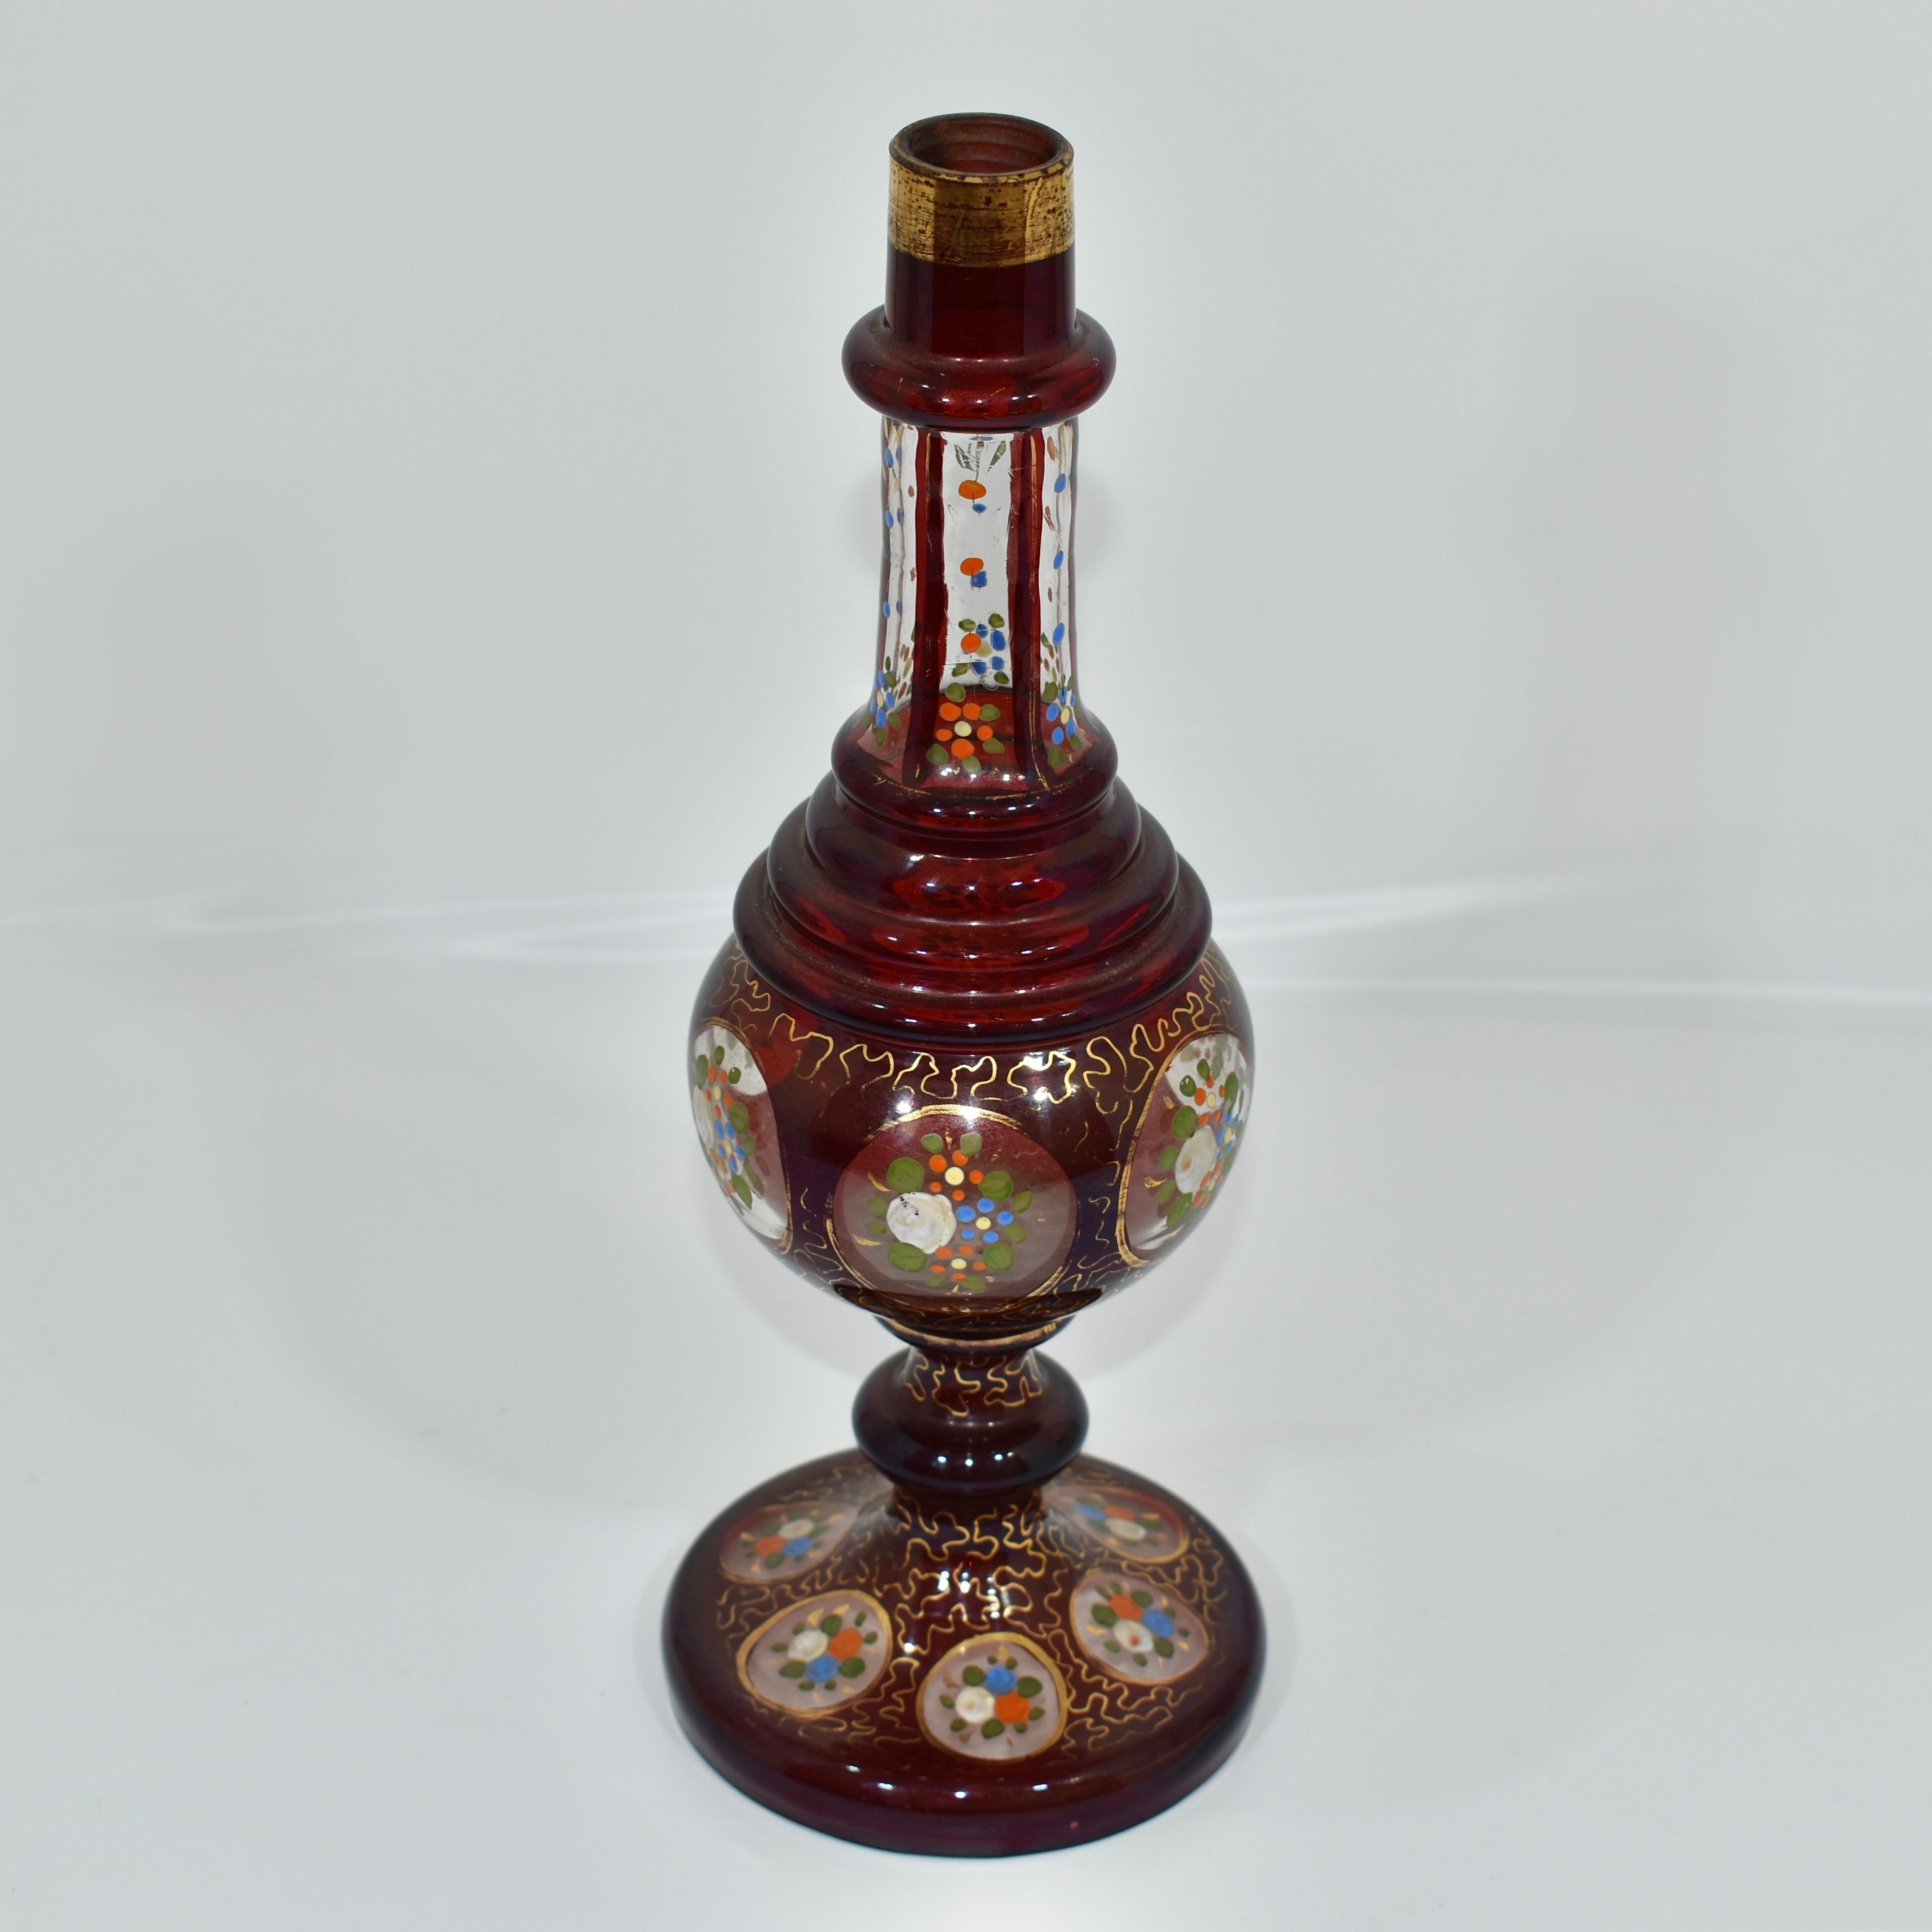 Antique Islamic Enameled Ruby Glass Rose Water Sprinkler, Bohemia, 19th Century In Good Condition For Sale In Rostock, MV